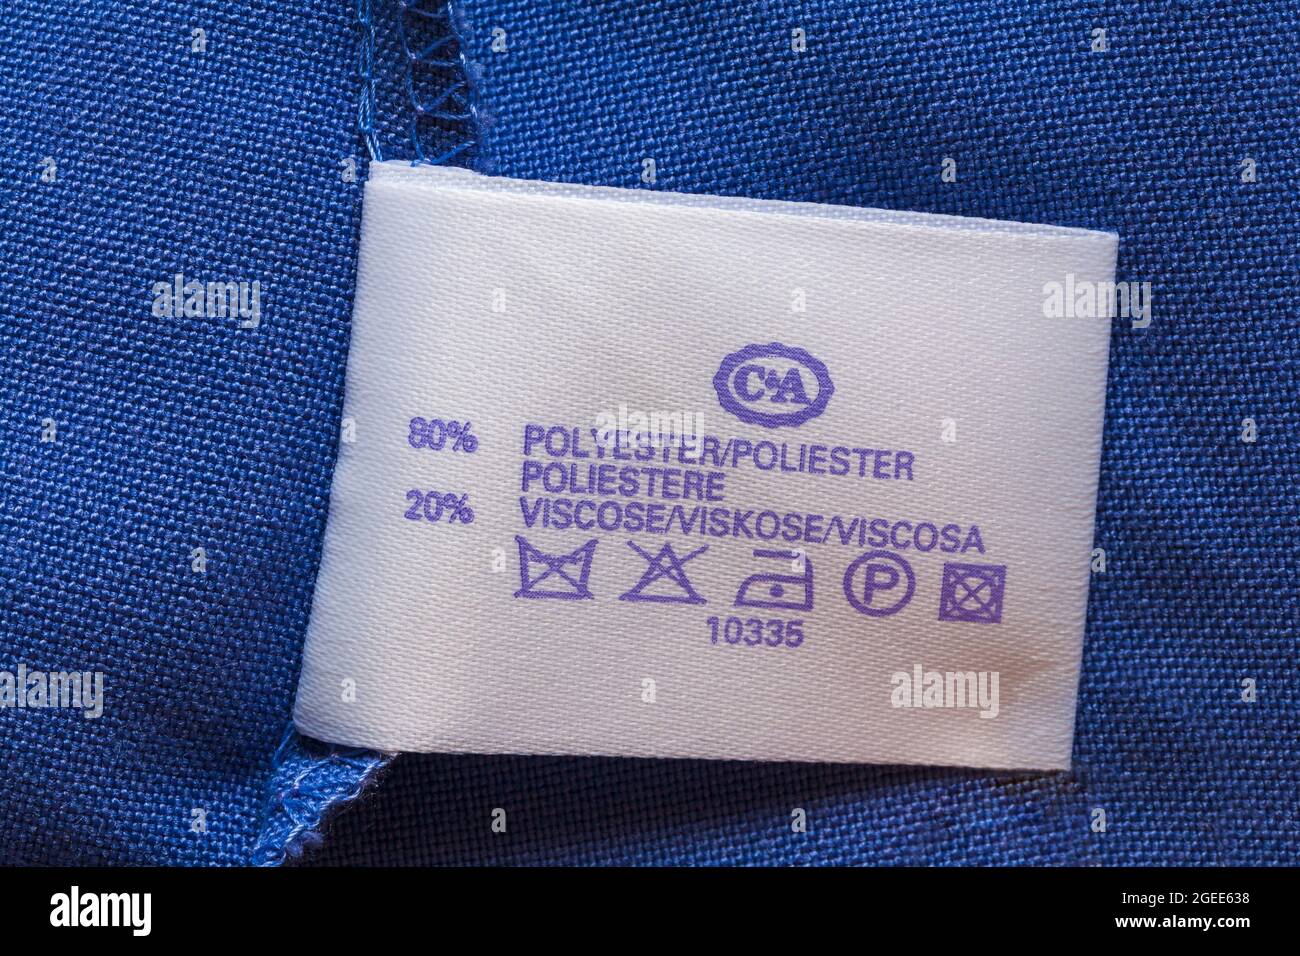 label in woman's blue jacket from C&A 80% polyester 20% viscose with washing care symbols Stock Photo